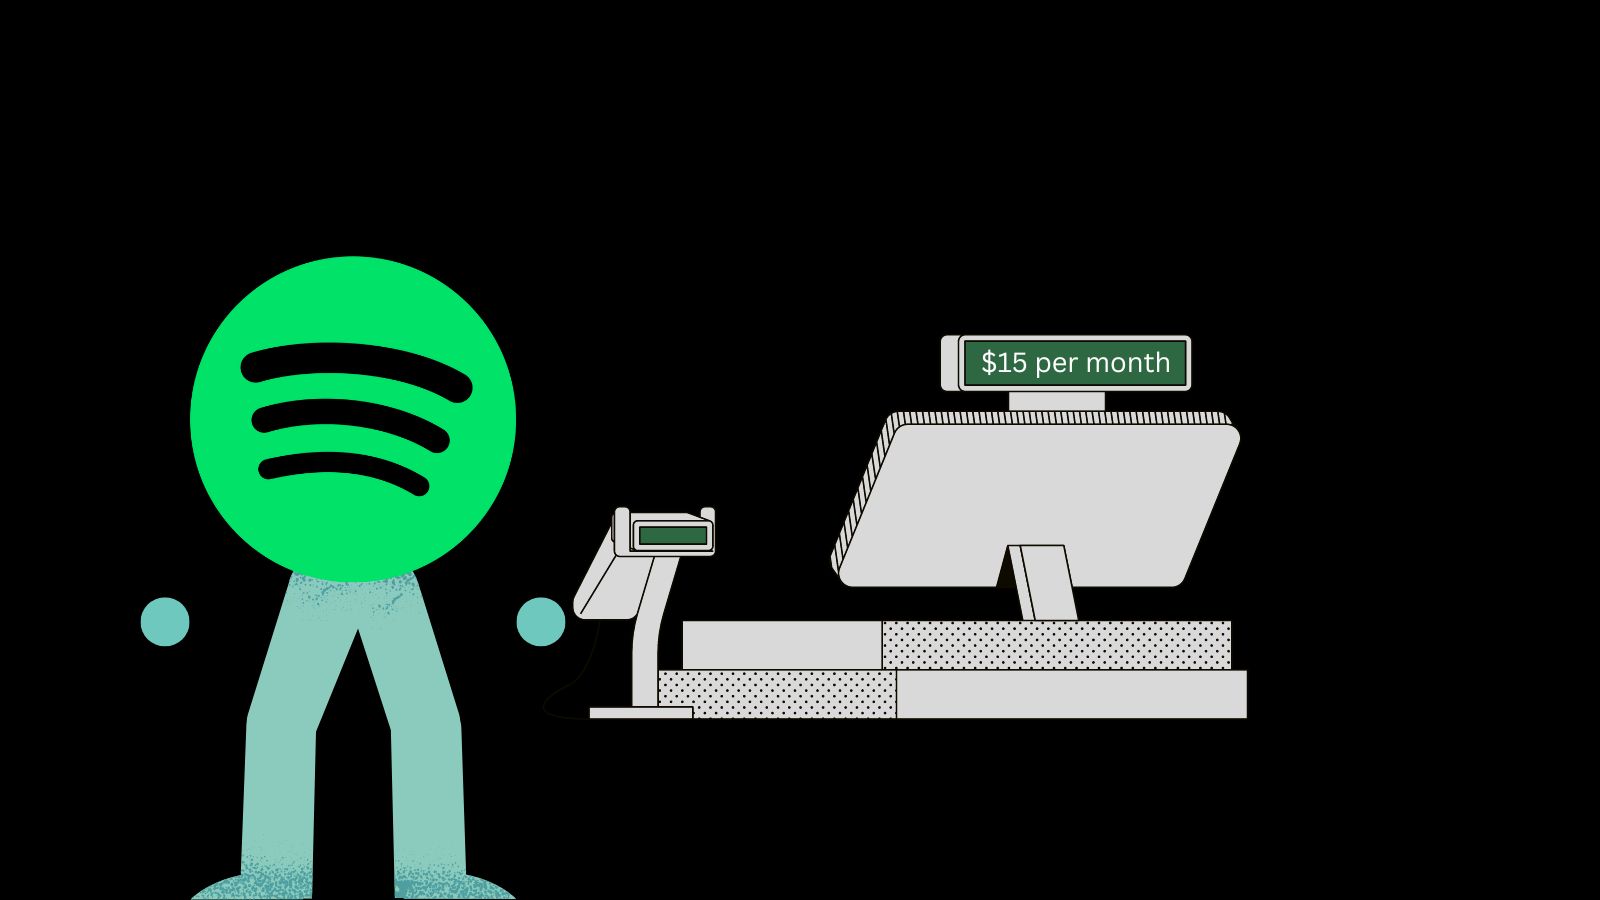 Spotify charging too much